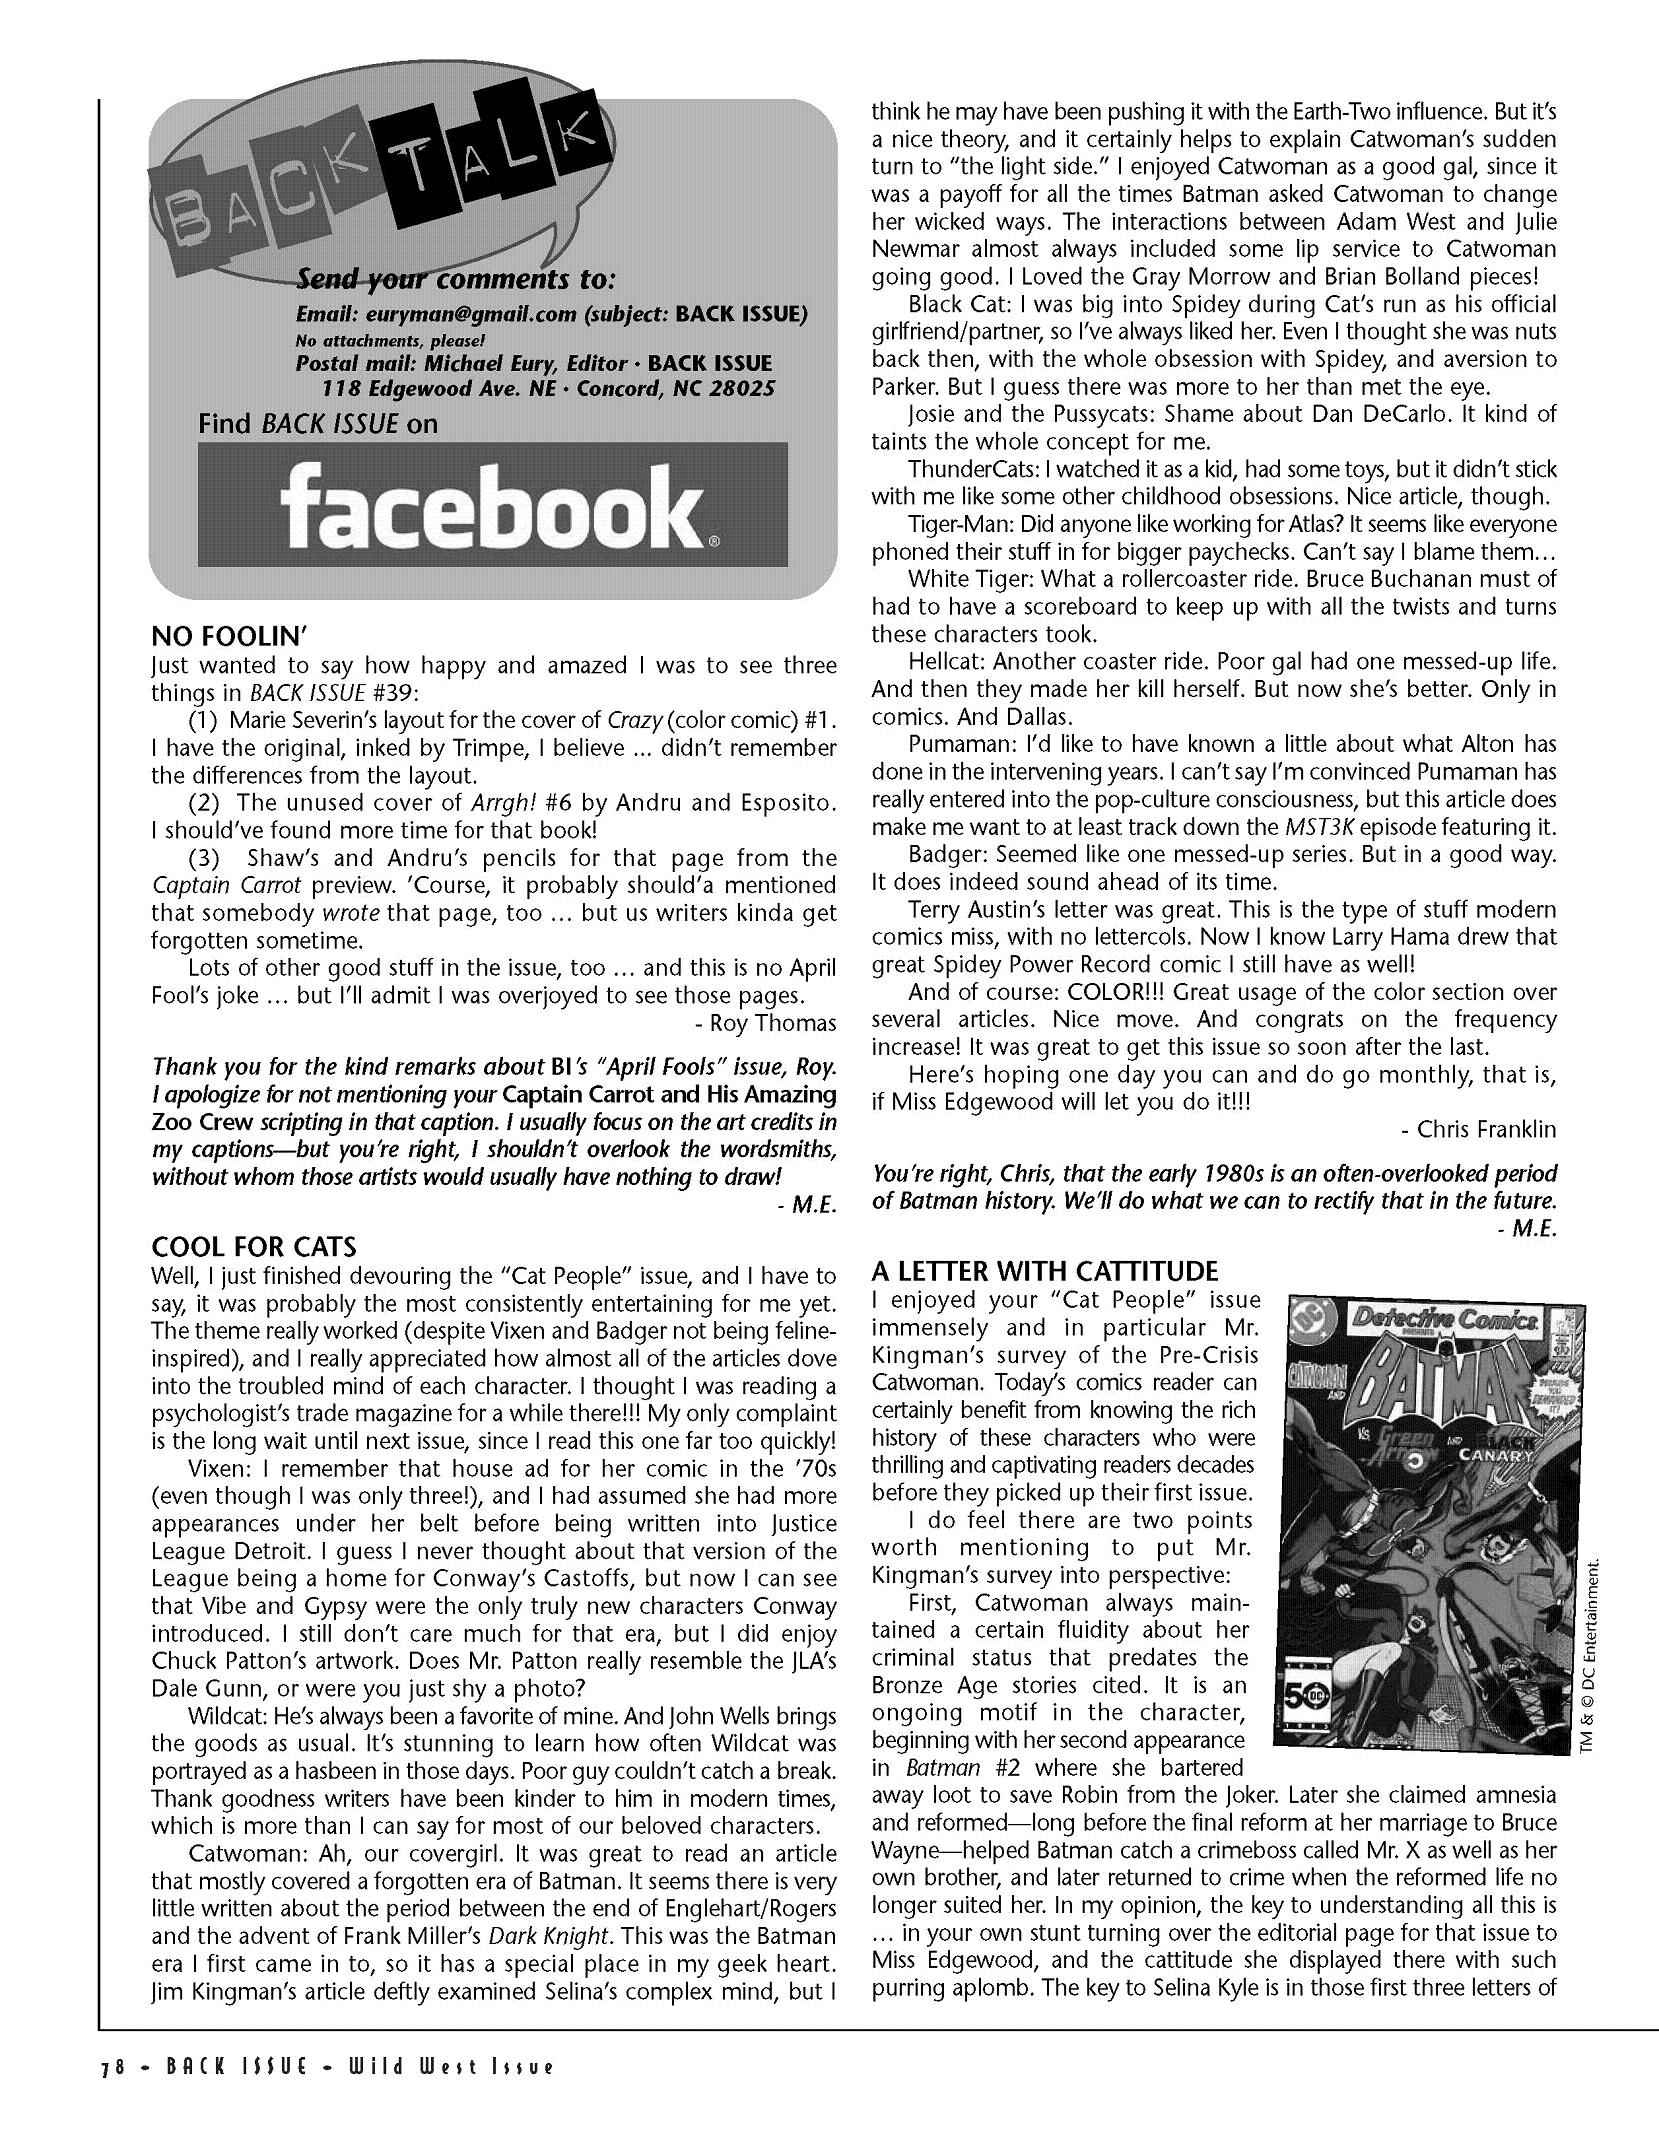 Read online Back Issue comic -  Issue #42 - 80